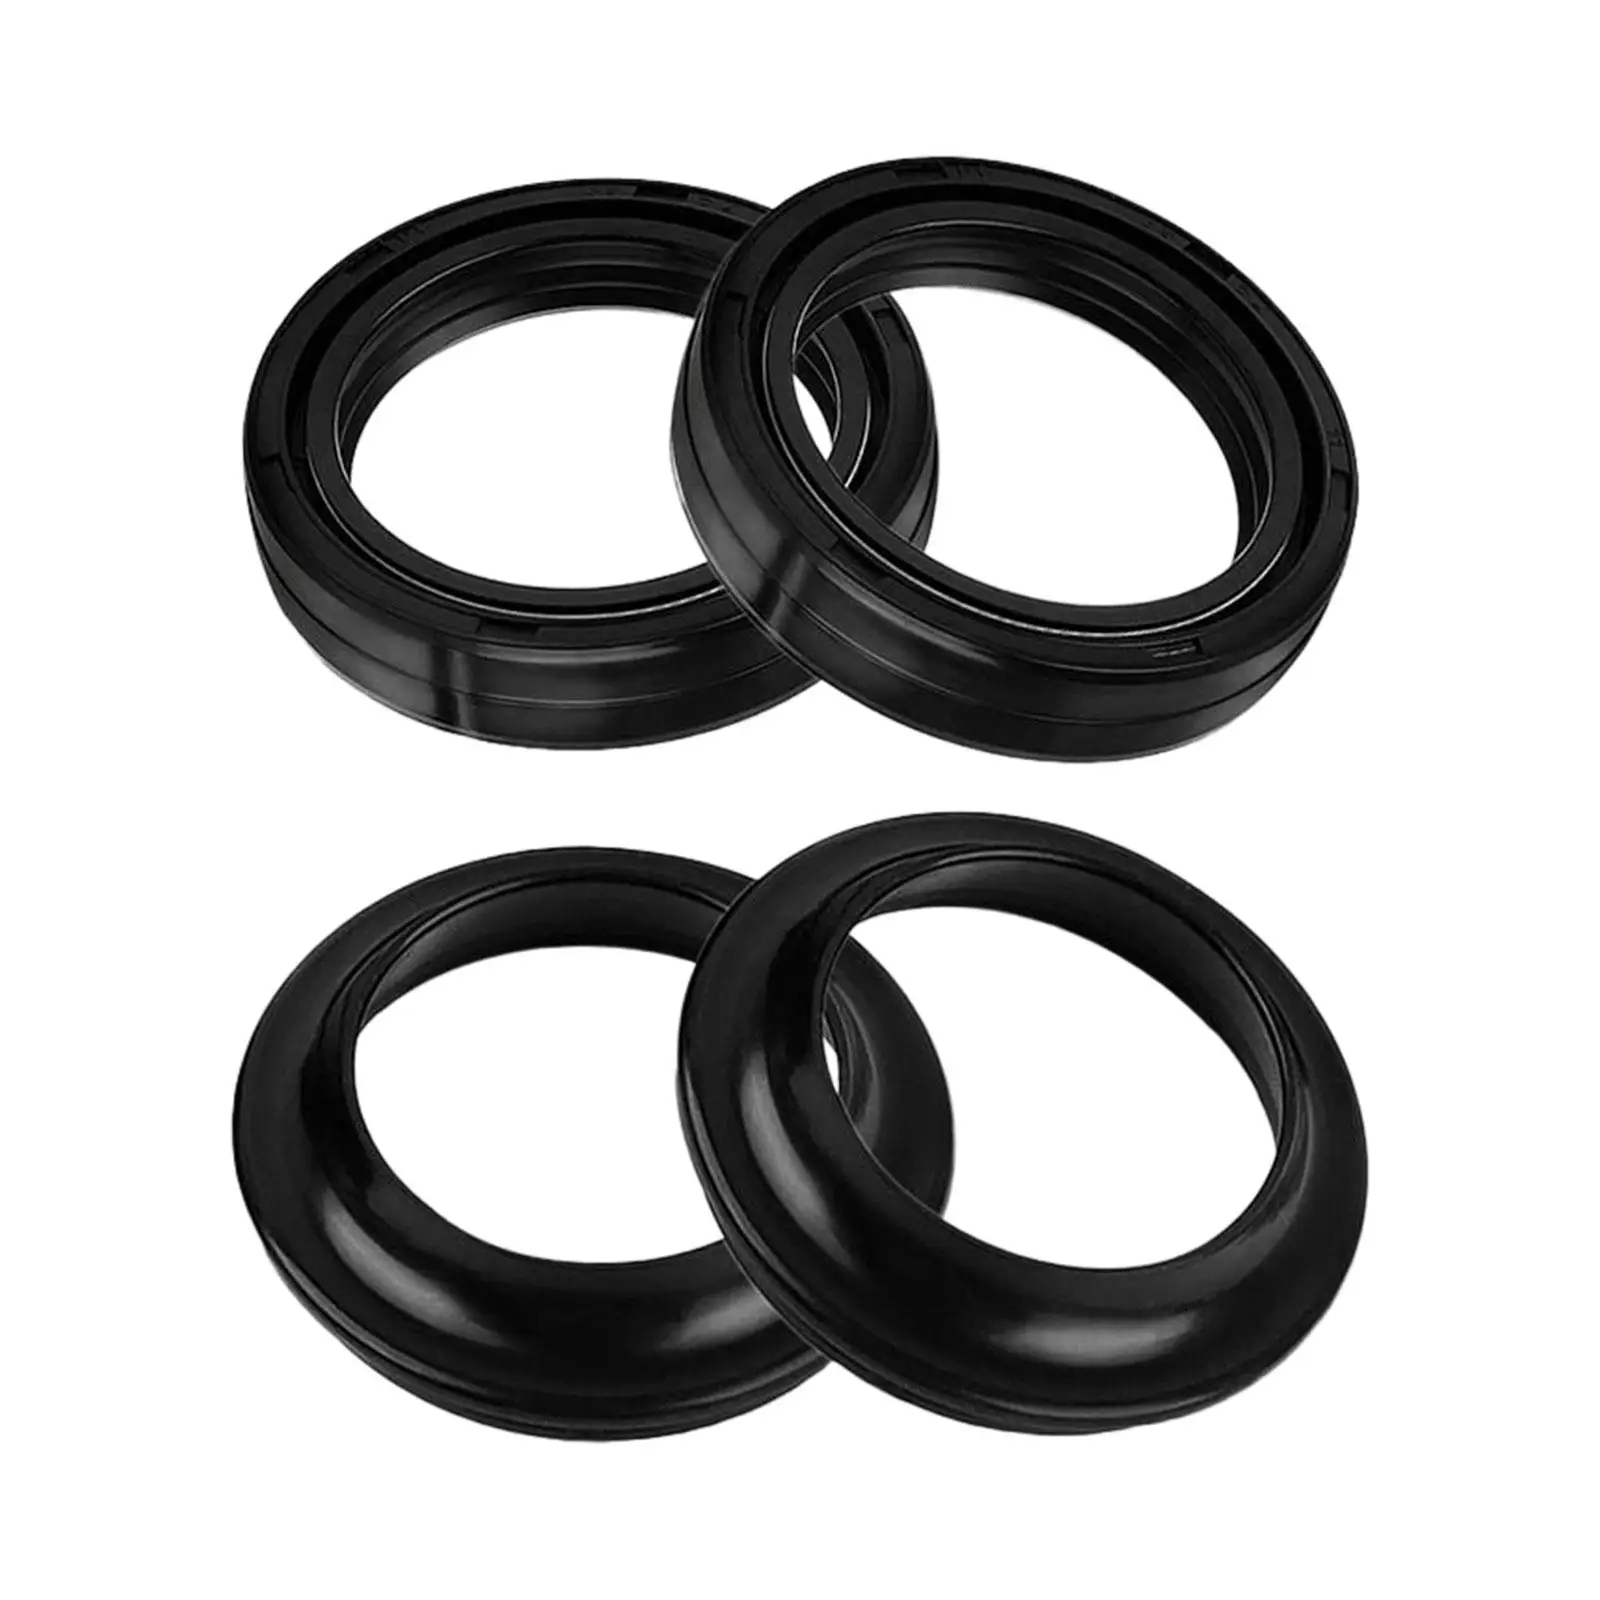 4Pcs 39x52x11mm Motorcycle Front Fork Damper Oil Seal and Dust Seal Premium